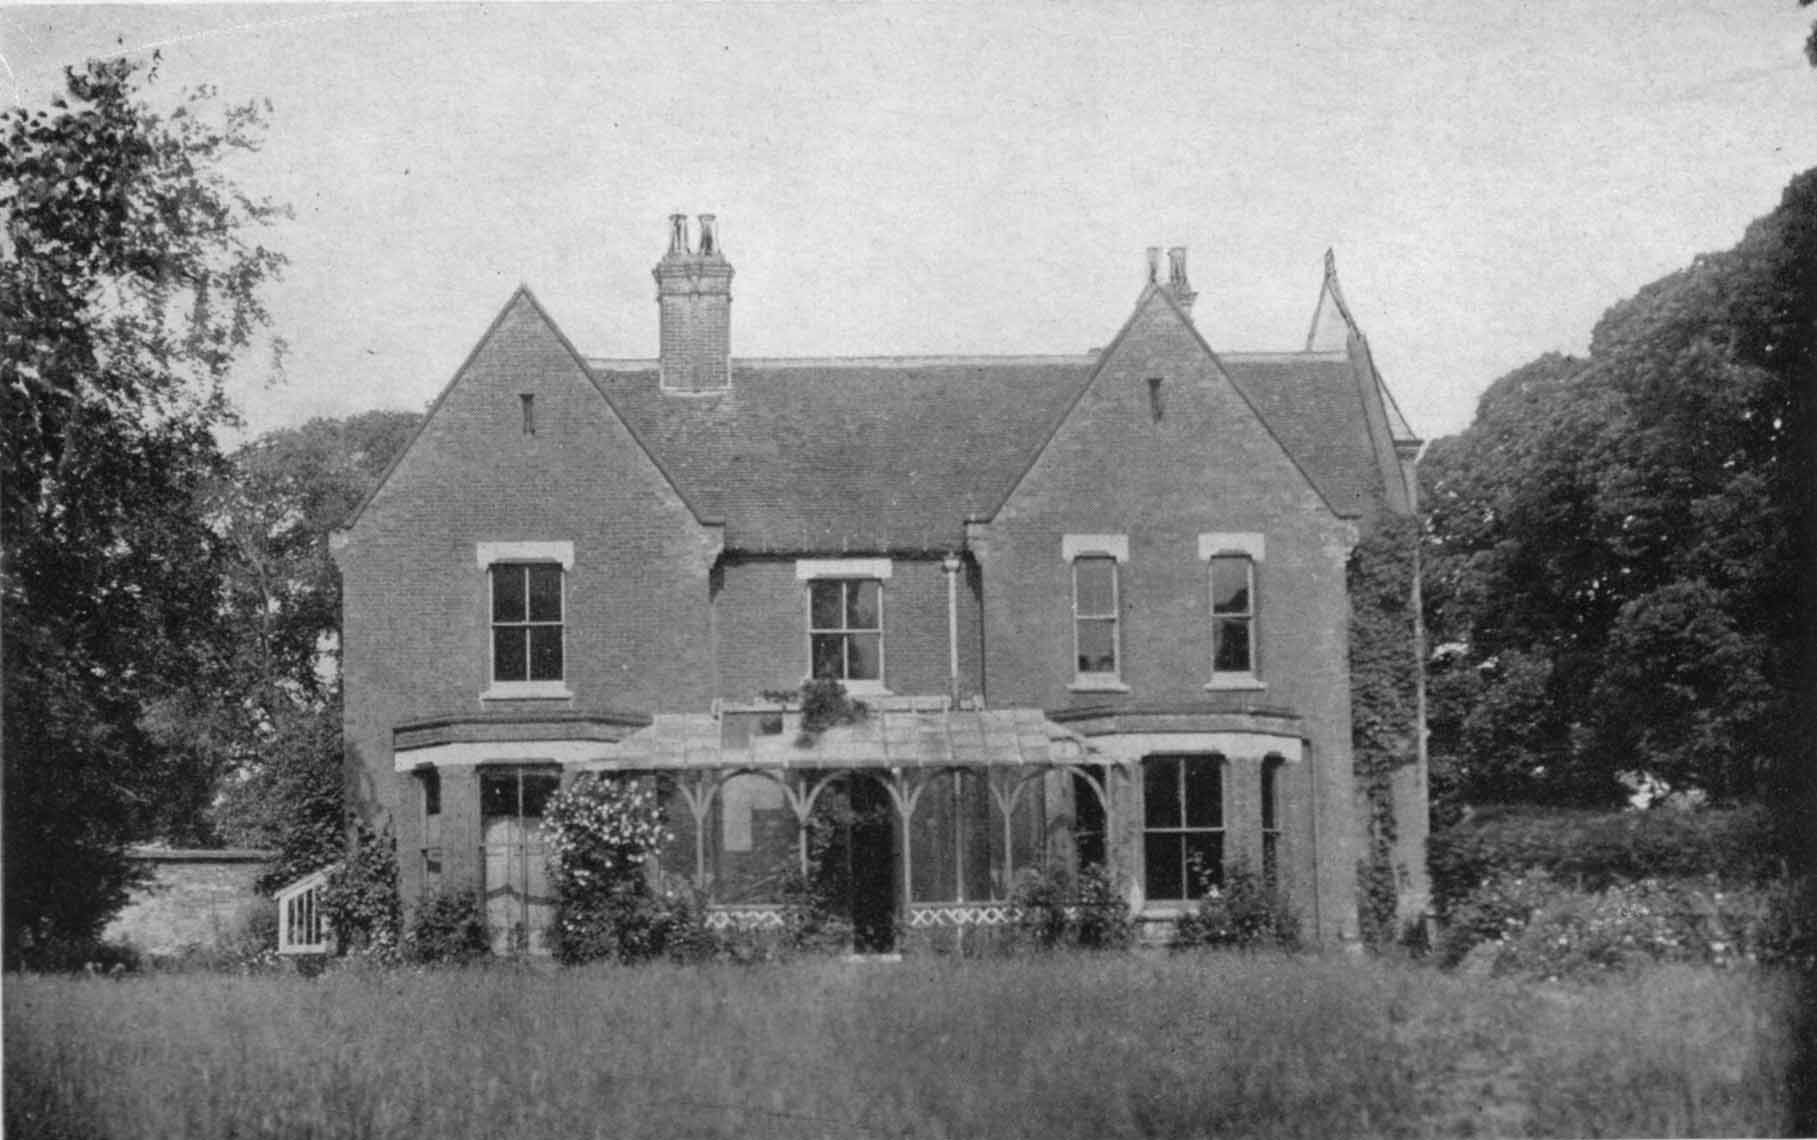 Borley Rectory: A Century ofPoltergeists by Harry Price